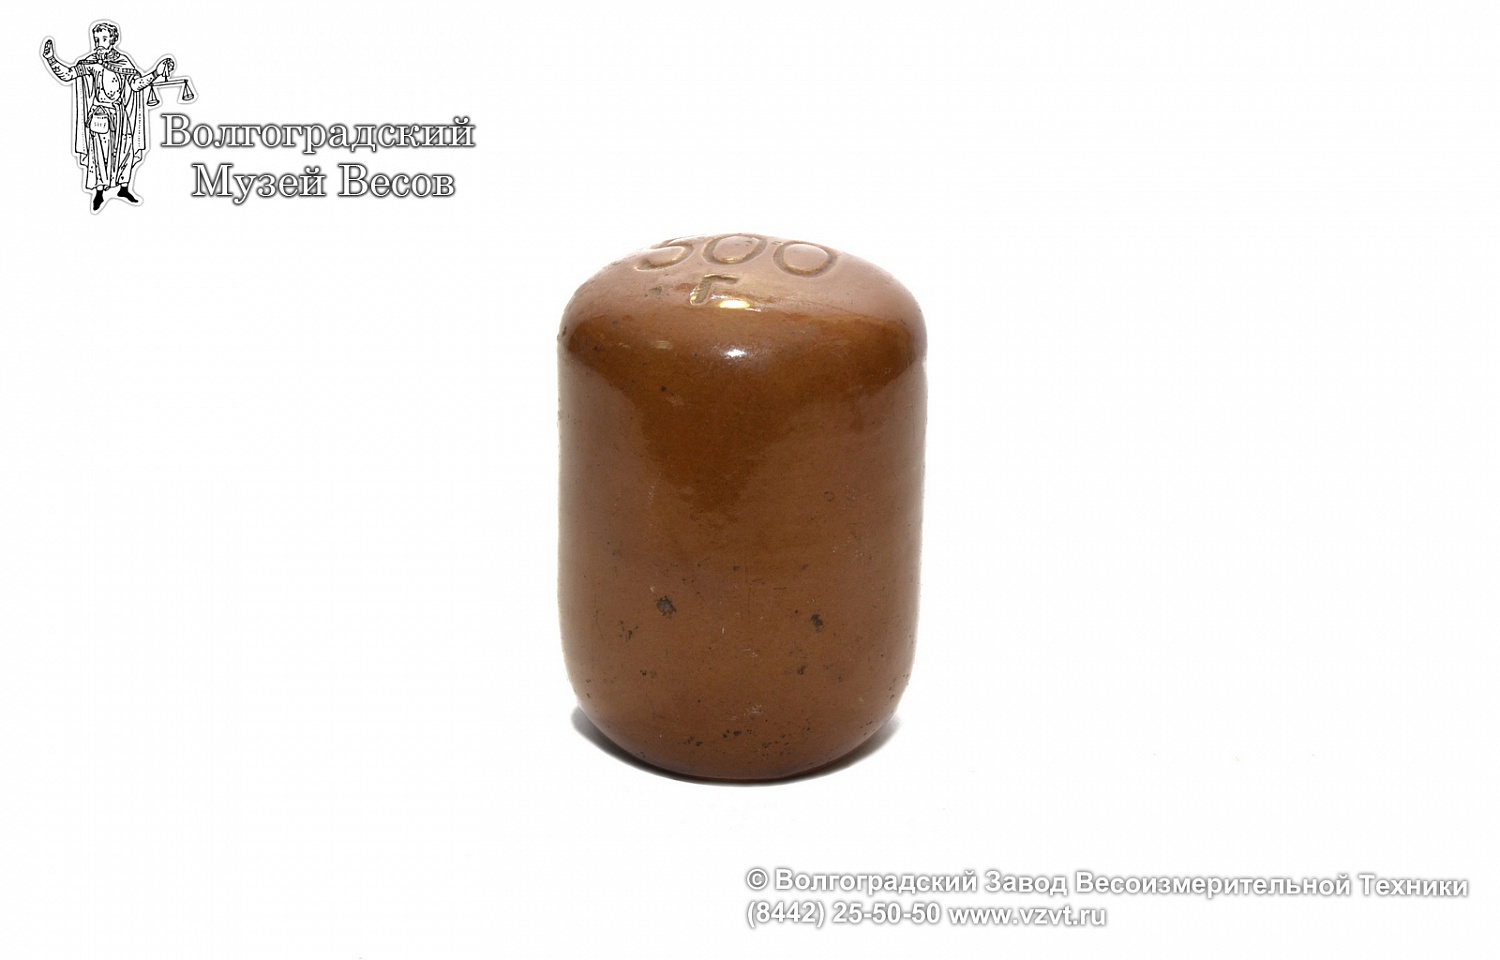 Ceramic cylindrical weight of a nominal value of 500 gram. The USSR, 1935